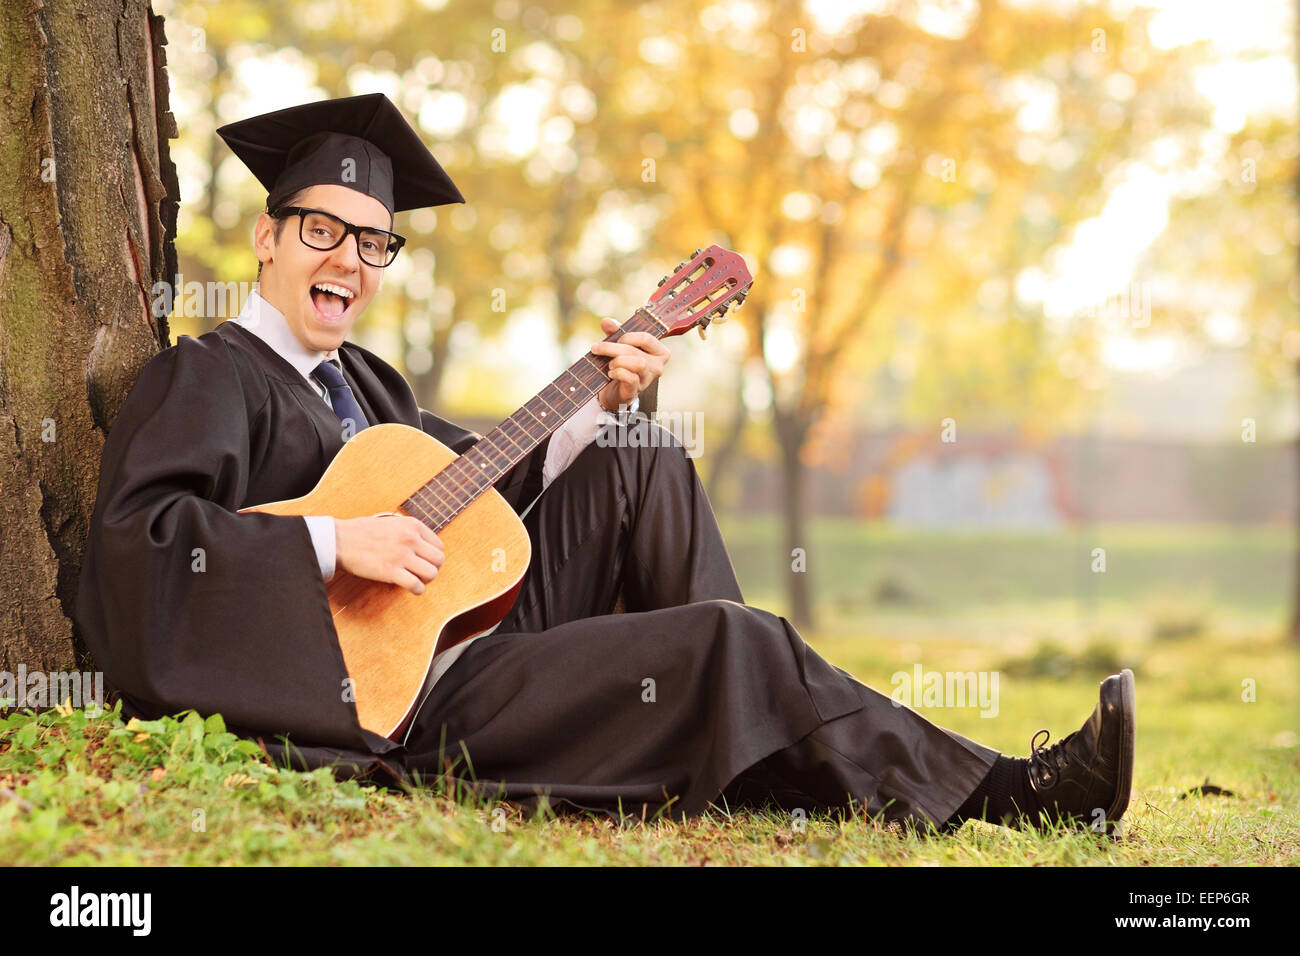 Graduate student playing acoustic guitar in park Stock Photo